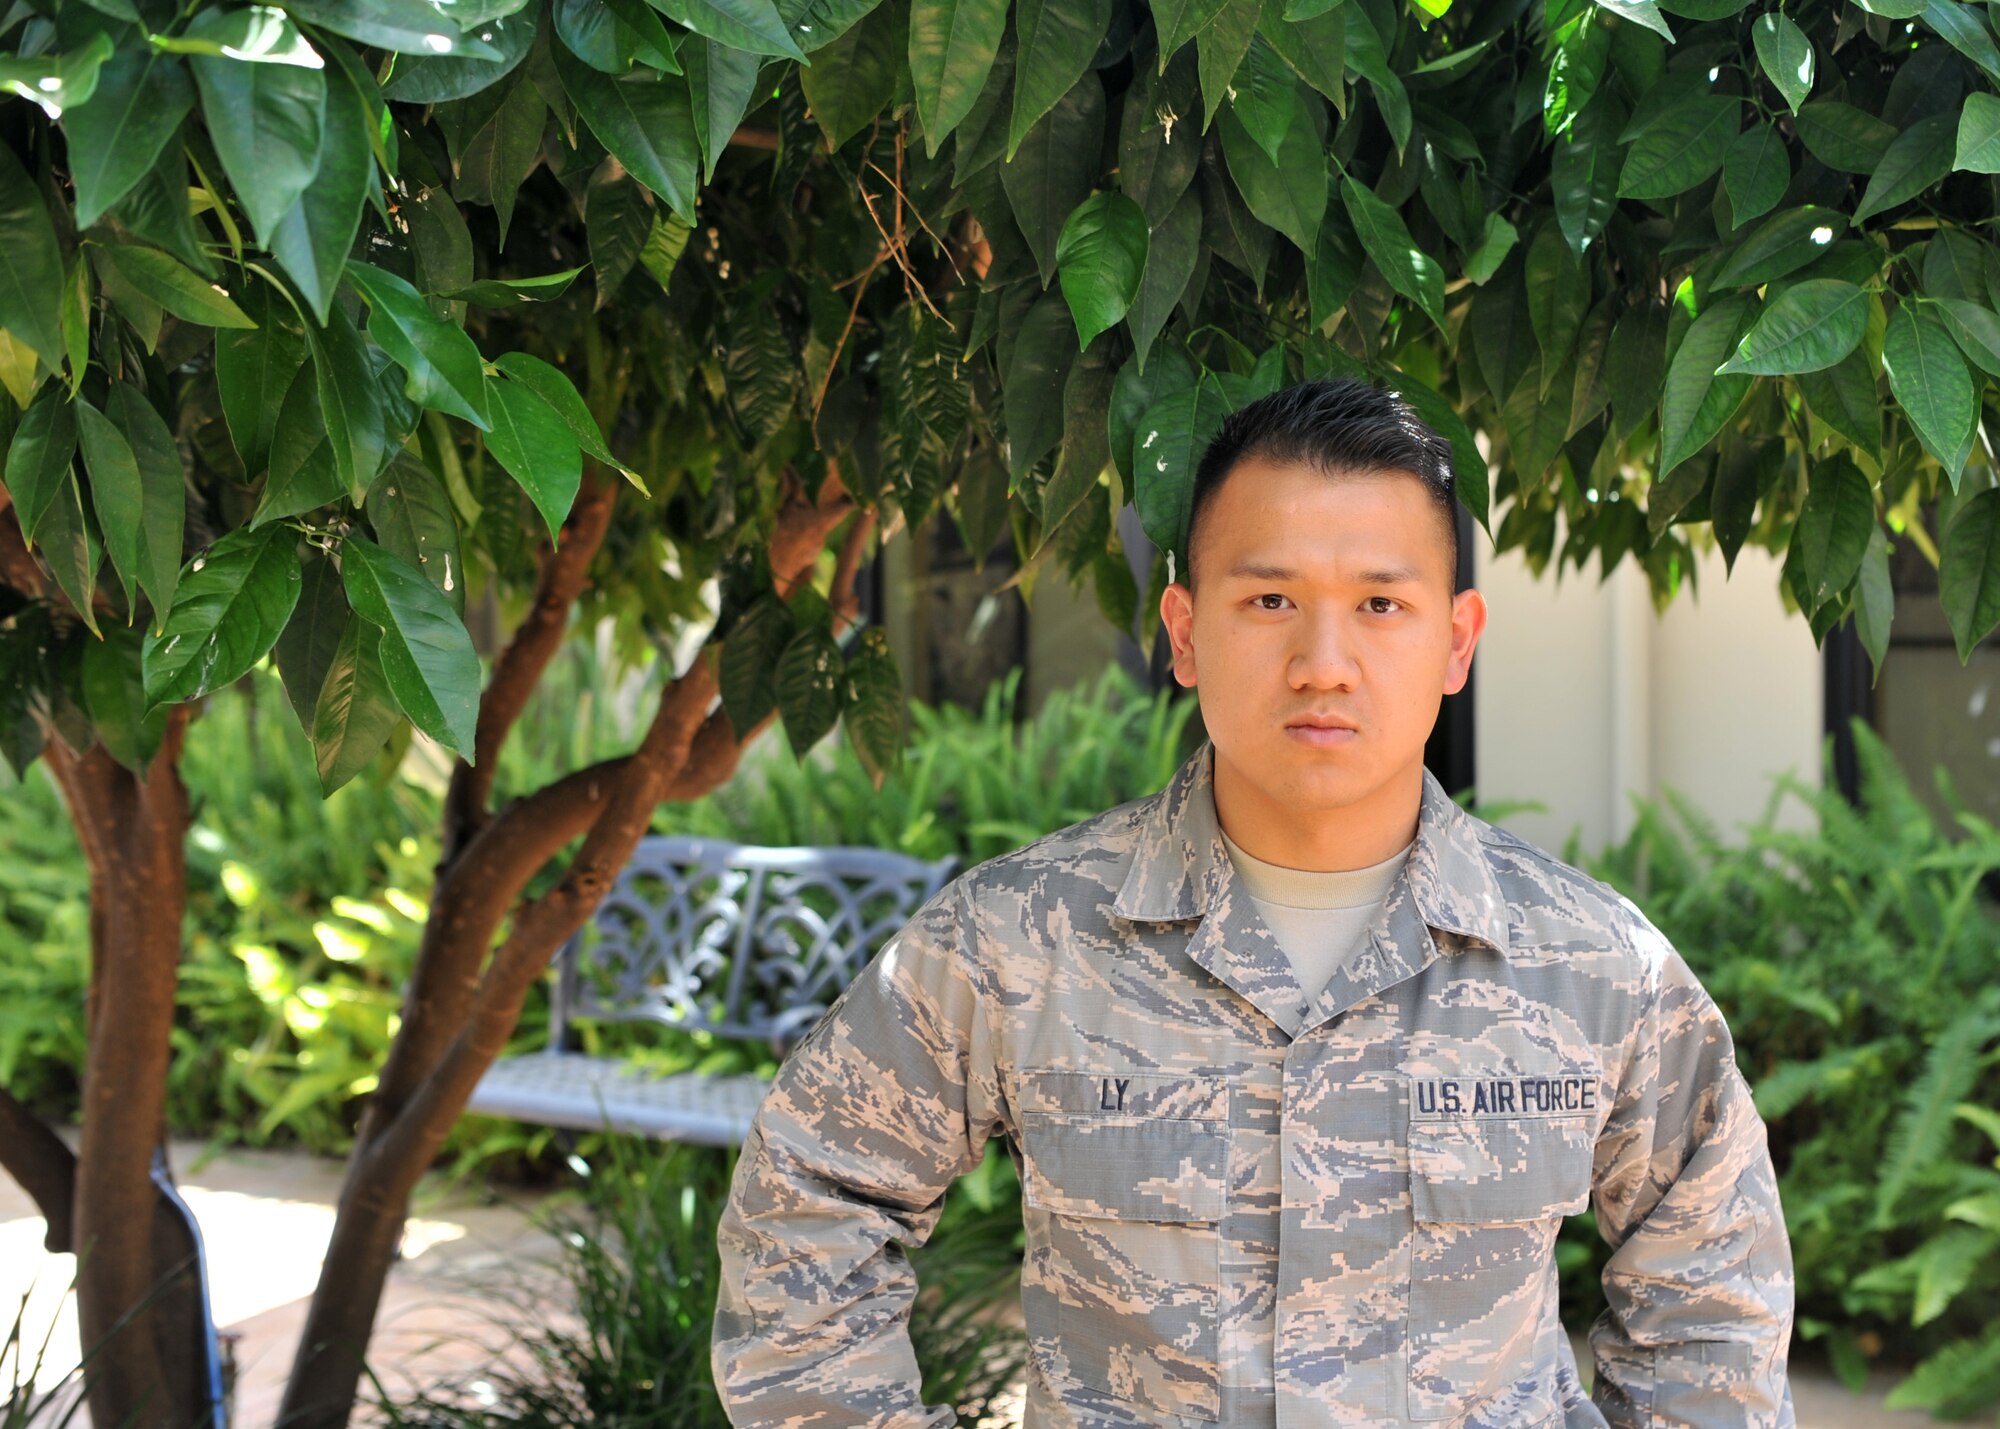 Senior Airman Tam Ly, 9th Medical Group public health technician, poses for a photo May 24, 2017 at Beale Air Force Base, California. (U.S. Air Force photo/Airman 1st Class Tristan D. Viglianco)